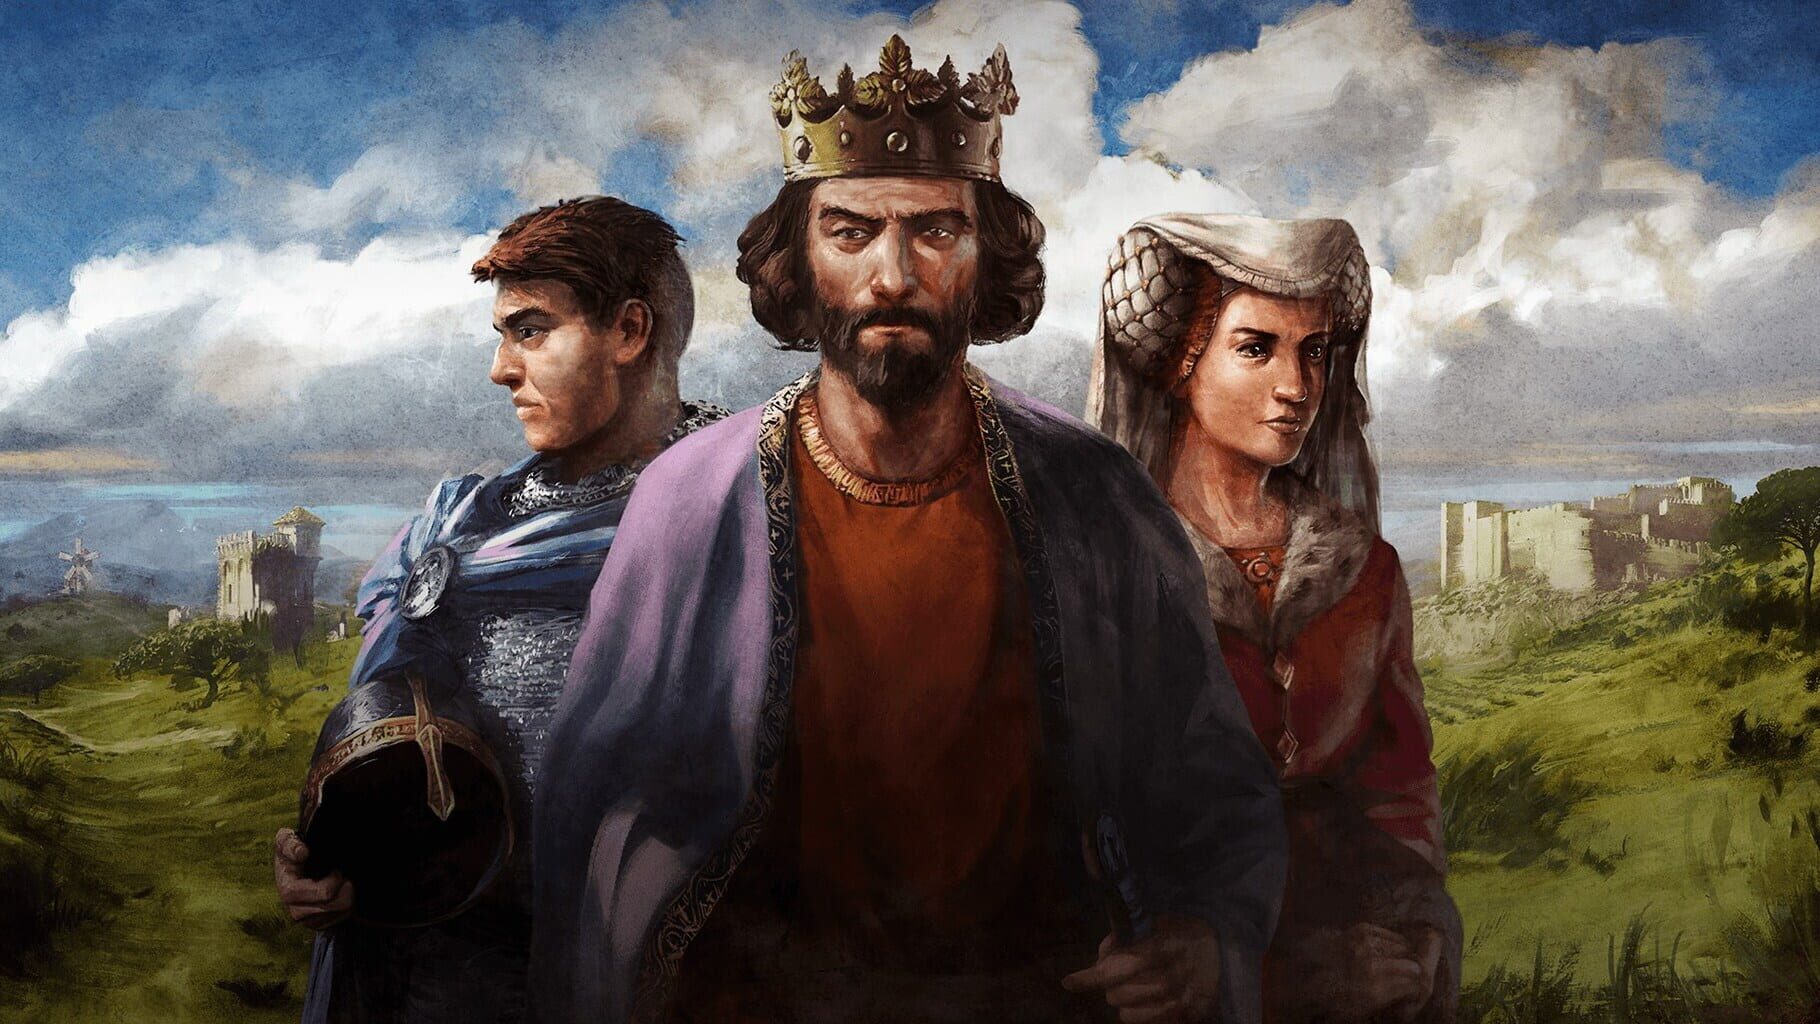 Arte - Age of Empires II: Definitive Edition - Lords of the West